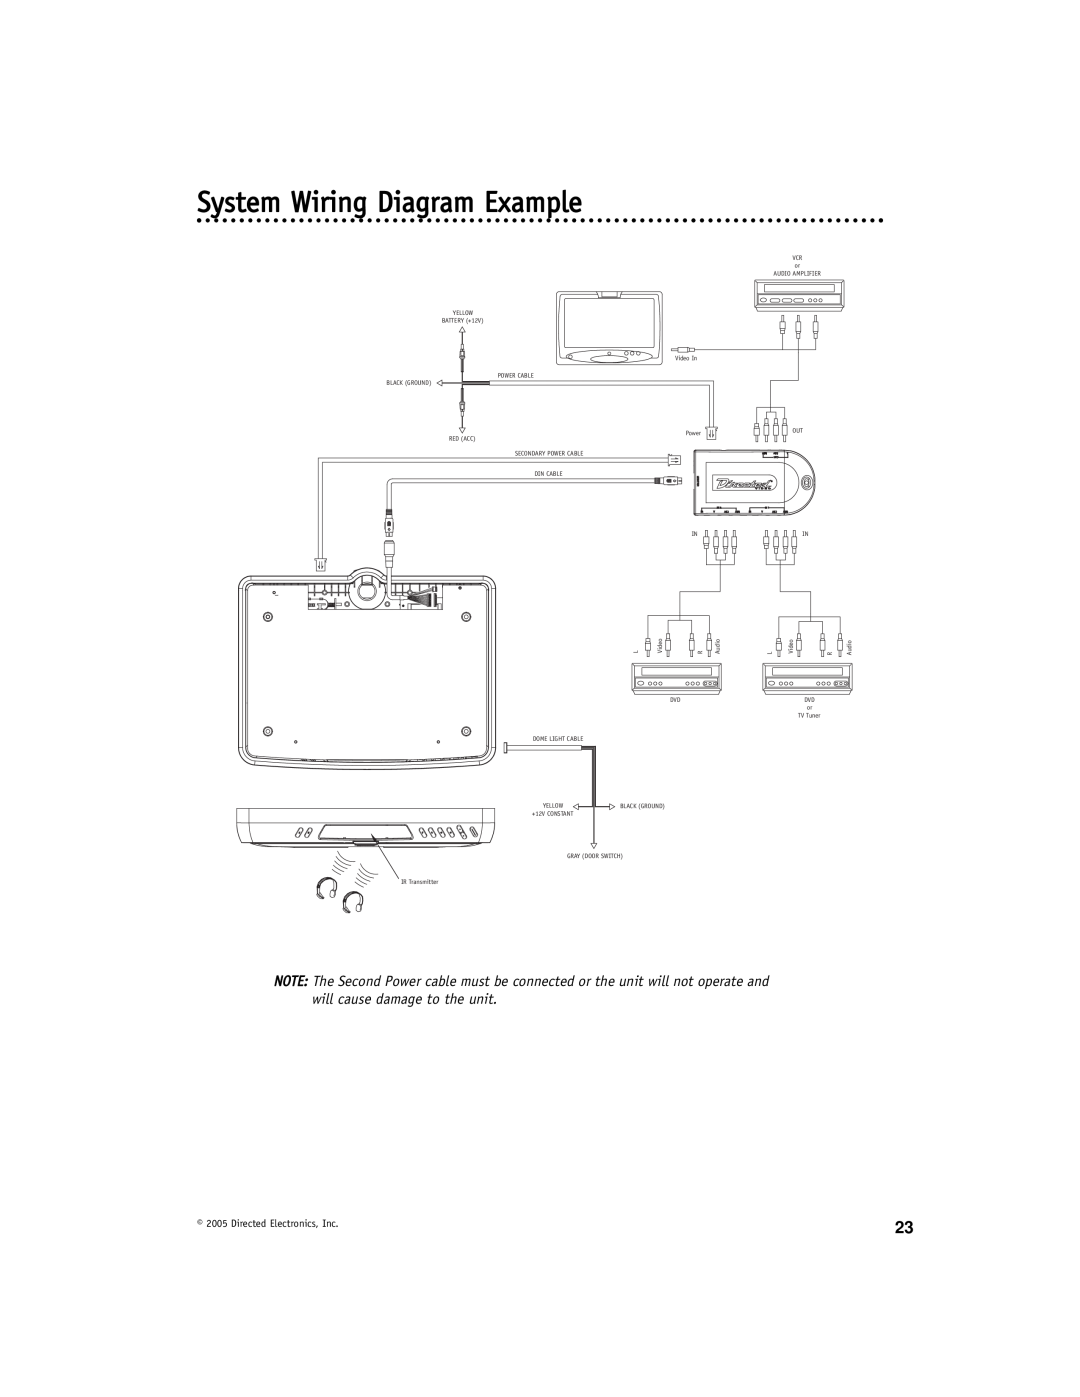 Directed Video OHW17 System Wiring Diagram Example, Directed Electronics, Inc, Yellow, Red Acc, Secondary Power Cable 